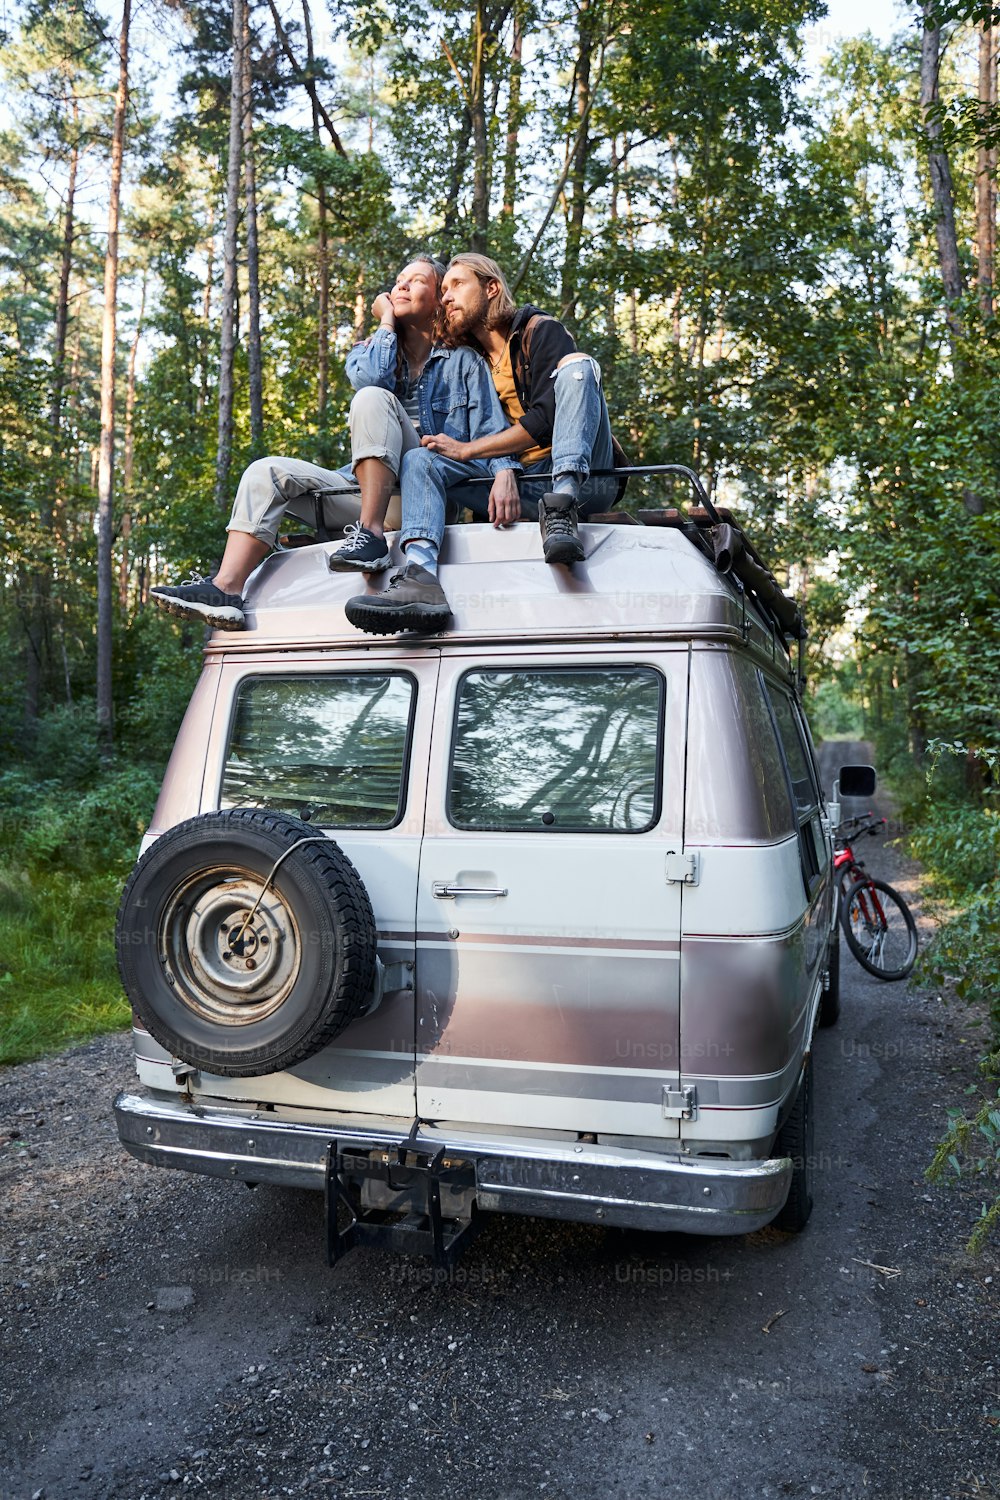 Loving couple sitting at the roof of a car in forest and enjoying a nature. Smiling man and woman together on camping trip